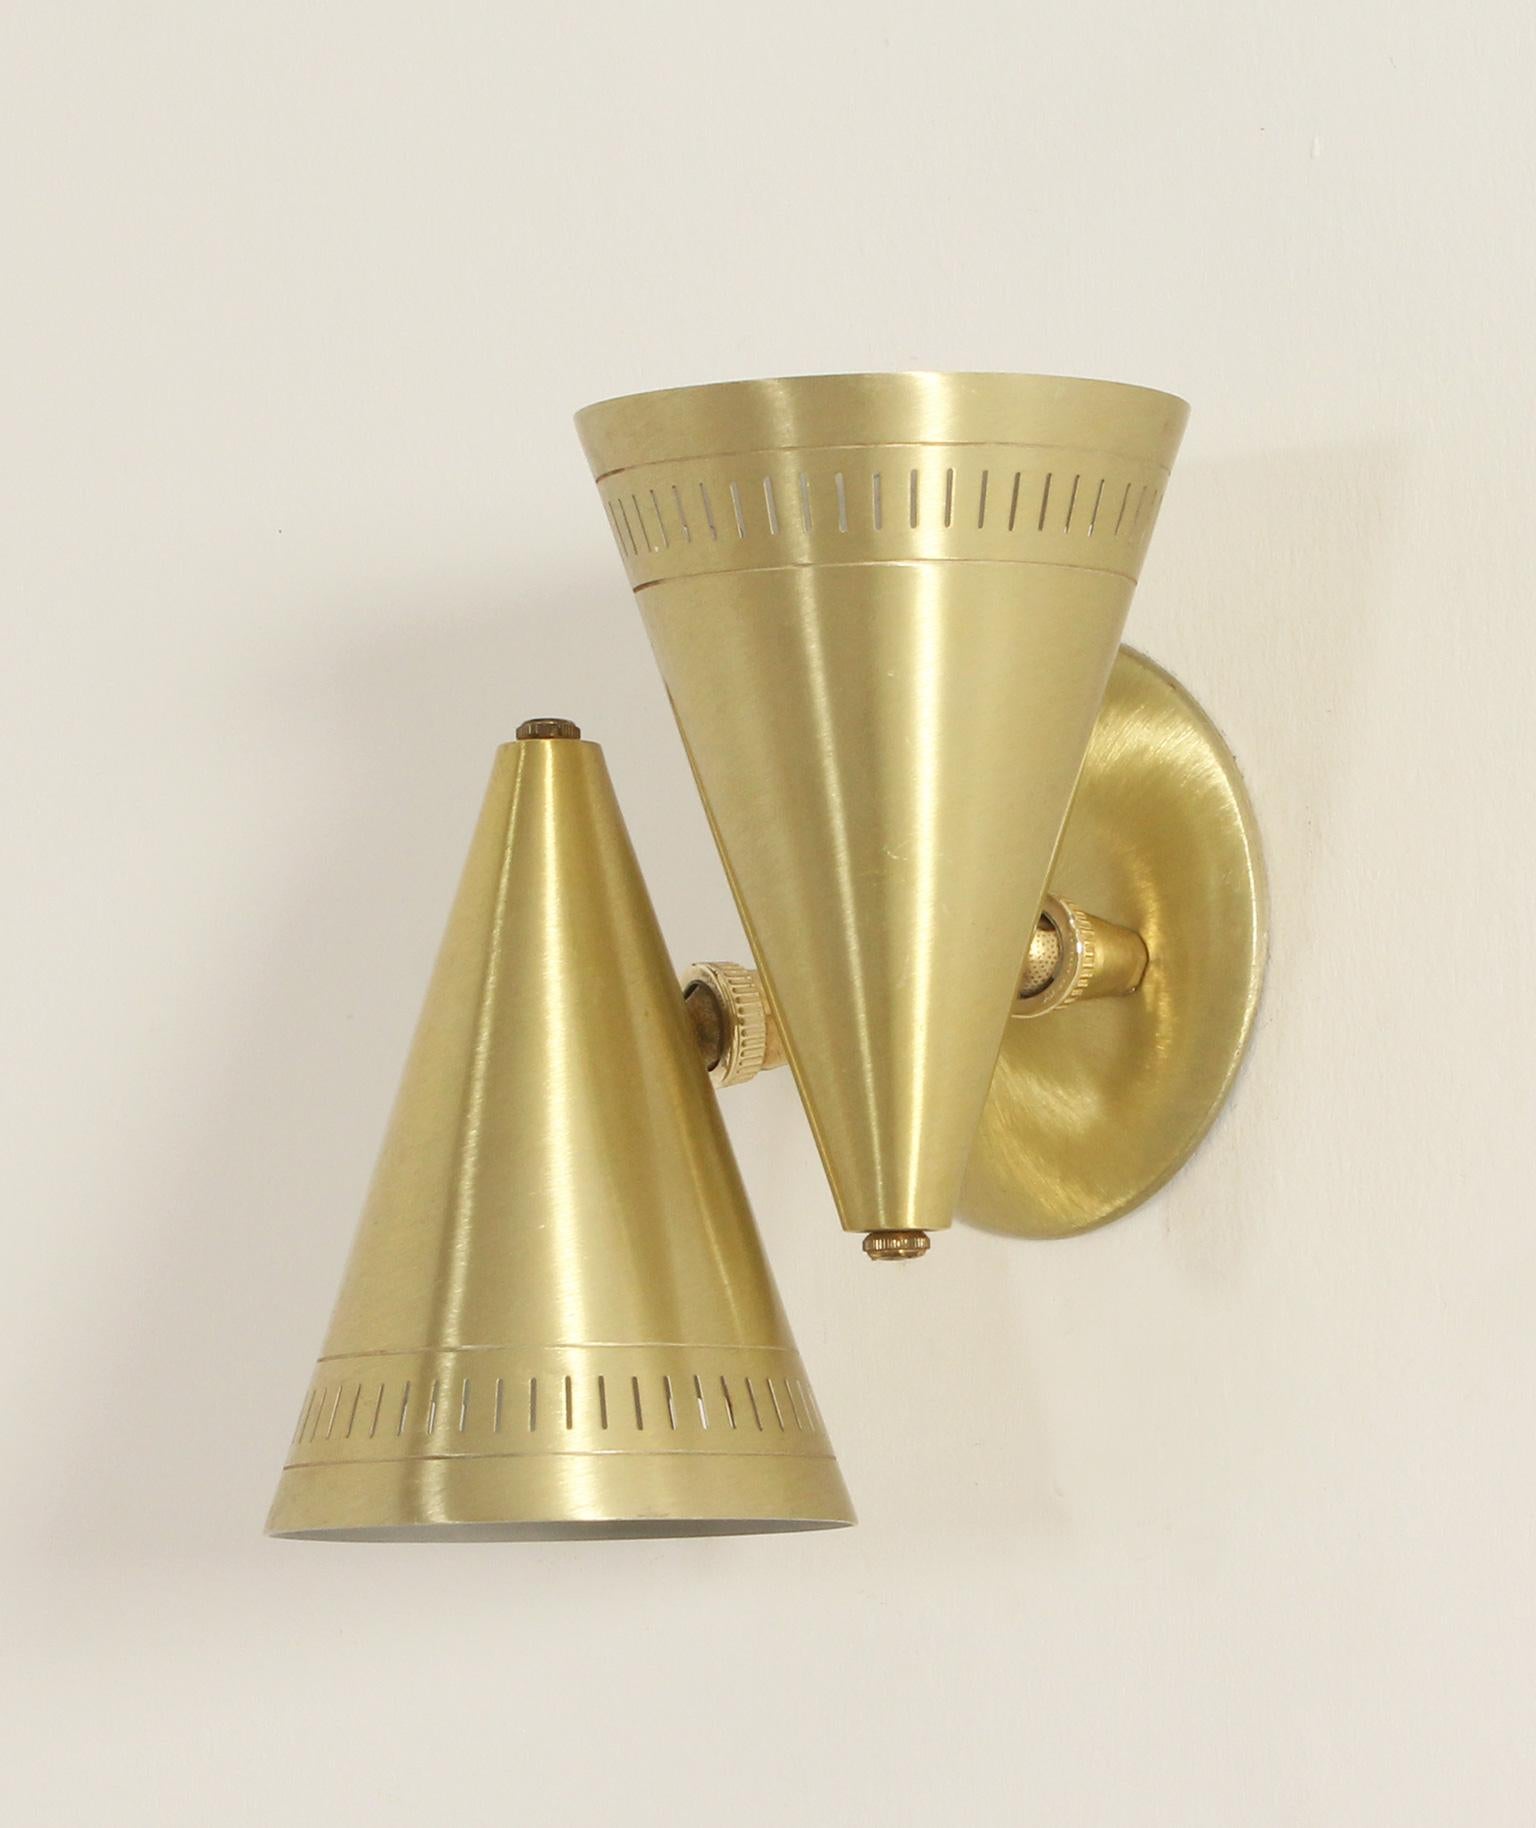 Double sconce produced by Lightcraft of California, USA, 1950's. Two rotary shades in gold anodized aluminum and golden plastic. 